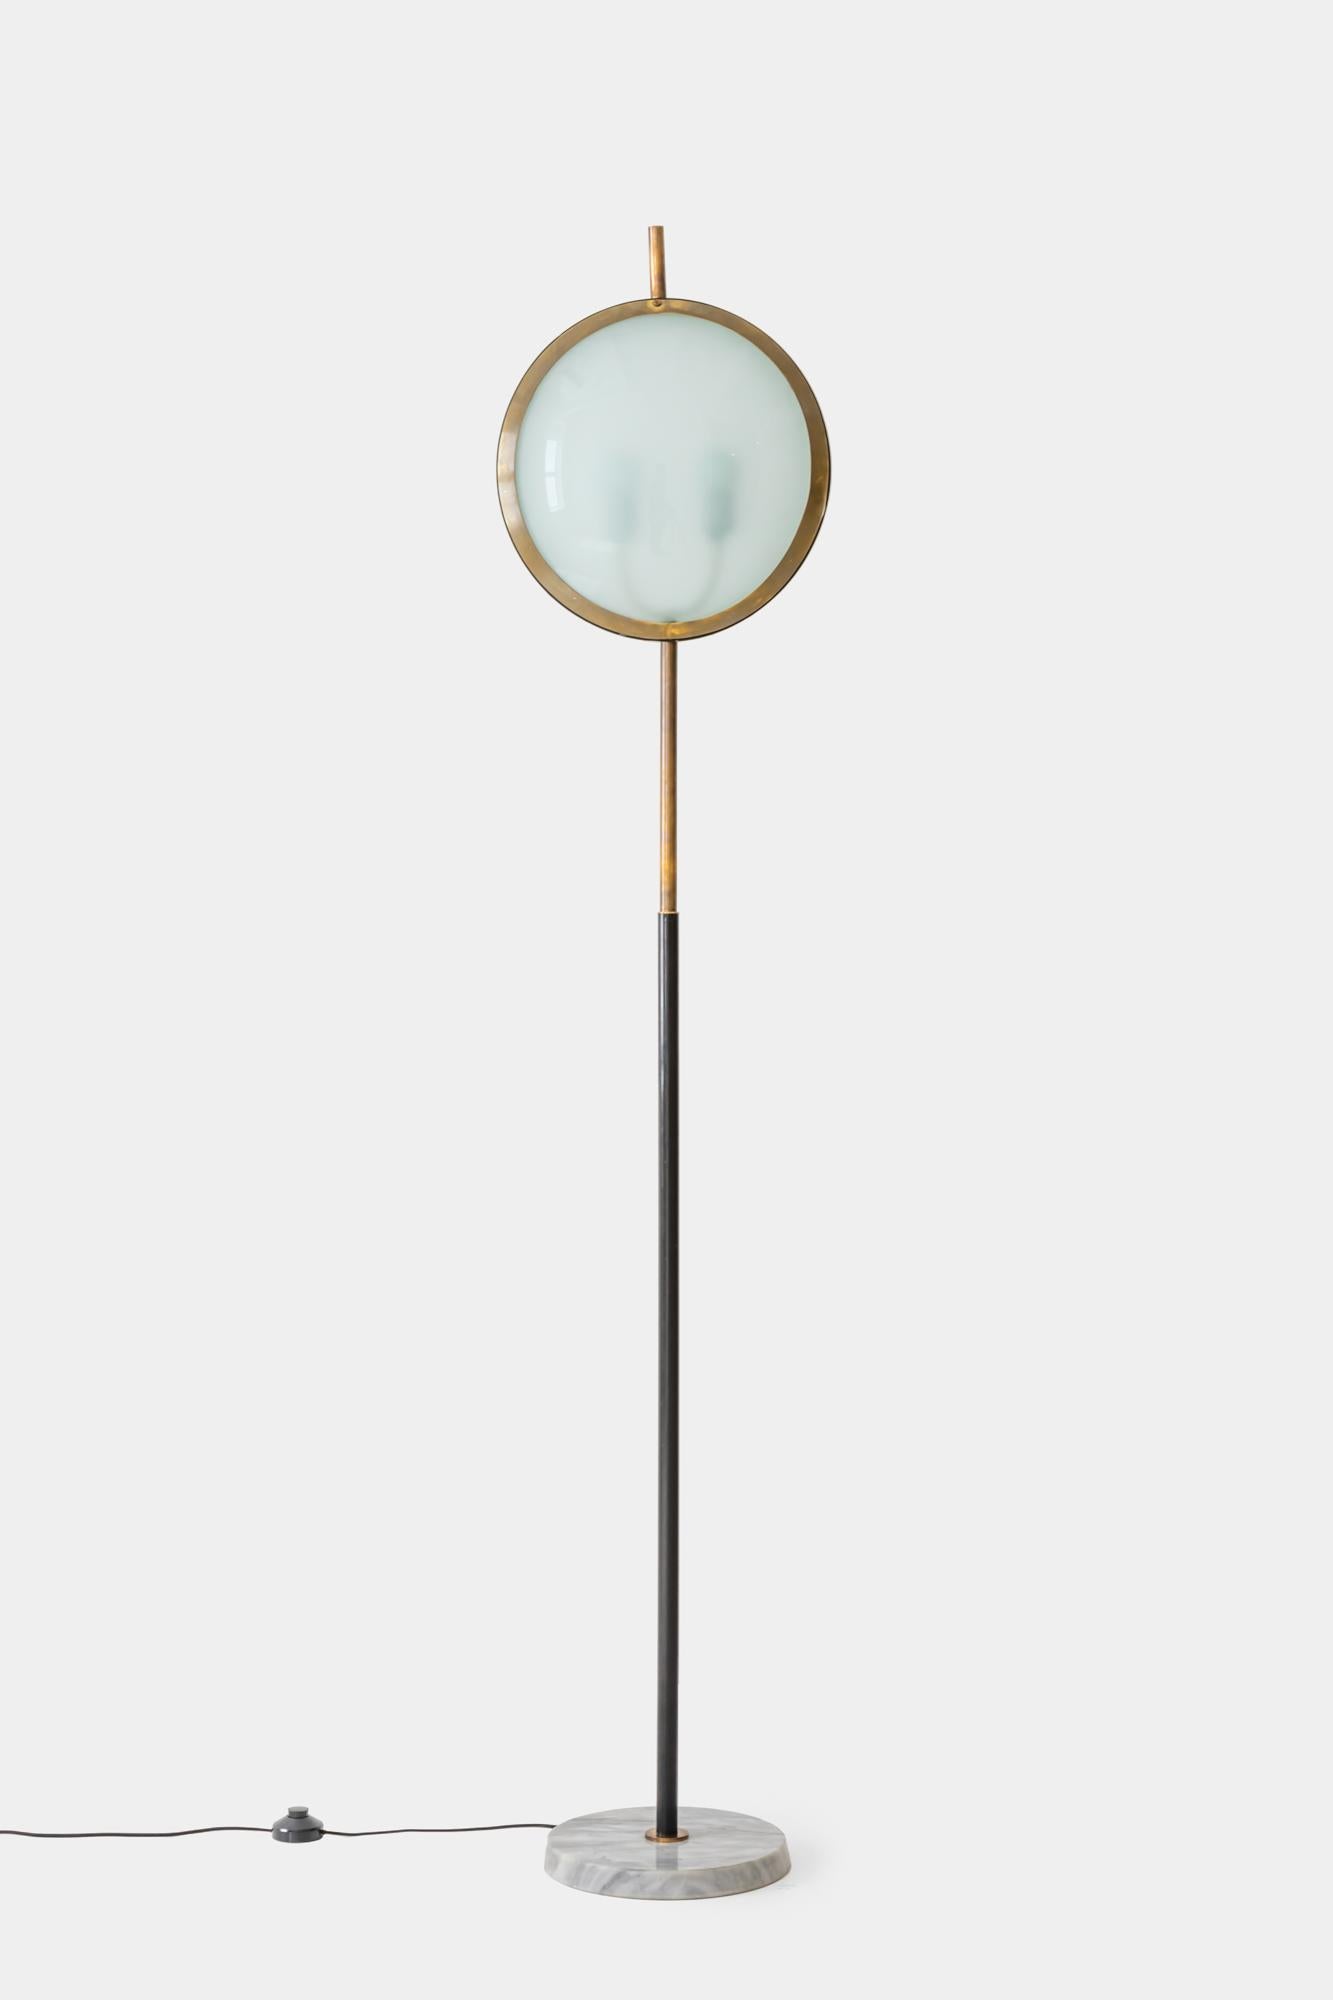 Stilnovo very rare floor lamp with convex textured glass shades on each side of brass and lacquered metal circular frame with brass finial, suspended on brass and black enameled stem on circular white marble base, Italy, 1950s. This original and